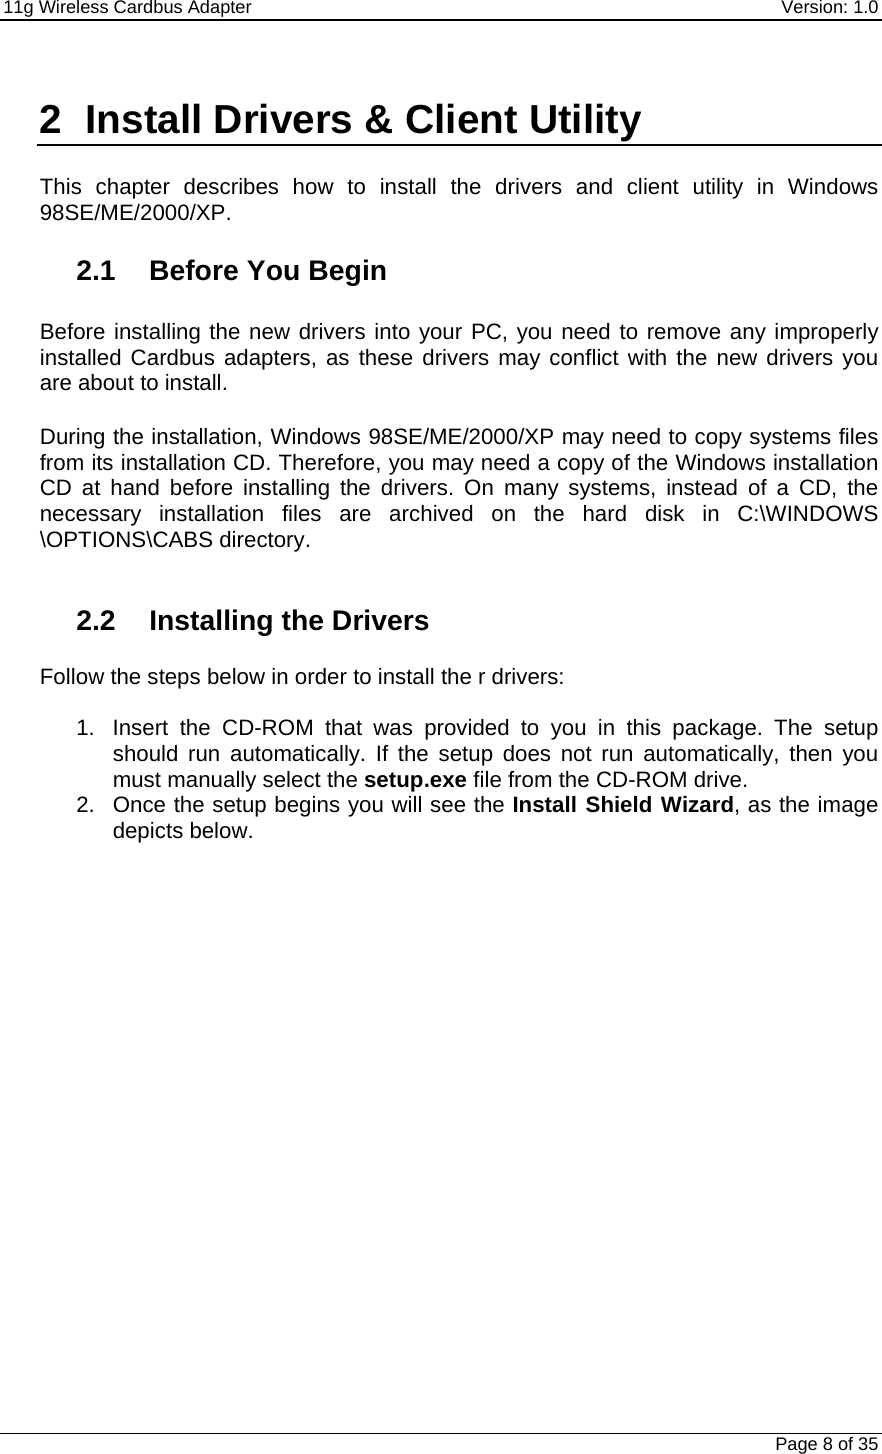 11g Wireless Cardbus Adapter    Version: 1.0   Page 8 of 35  2  Install Drivers &amp; Client Utility  This chapter describes how to install the drivers and client utility in Windows 98SE/ME/2000/XP.    2.1 Before You Begin  Before installing the new drivers into your PC, you need to remove any improperly installed Cardbus adapters, as these drivers may conflict with the new drivers you are about to install.   During the installation, Windows 98SE/ME/2000/XP may need to copy systems files from its installation CD. Therefore, you may need a copy of the Windows installation CD at hand before installing the drivers. On many systems, instead of a CD, the necessary installation files are archived on the hard disk in C:\WINDOWS \OPTIONS\CABS directory.   2.2  Installing the Drivers  Follow the steps below in order to install the r drivers:  1.  Insert the CD-ROM that was provided to you in this package. The setup should run automatically. If the setup does not run automatically, then you must manually select the setup.exe file from the CD-ROM drive. 2.  Once the setup begins you will see the Install Shield Wizard, as the image depicts below.  